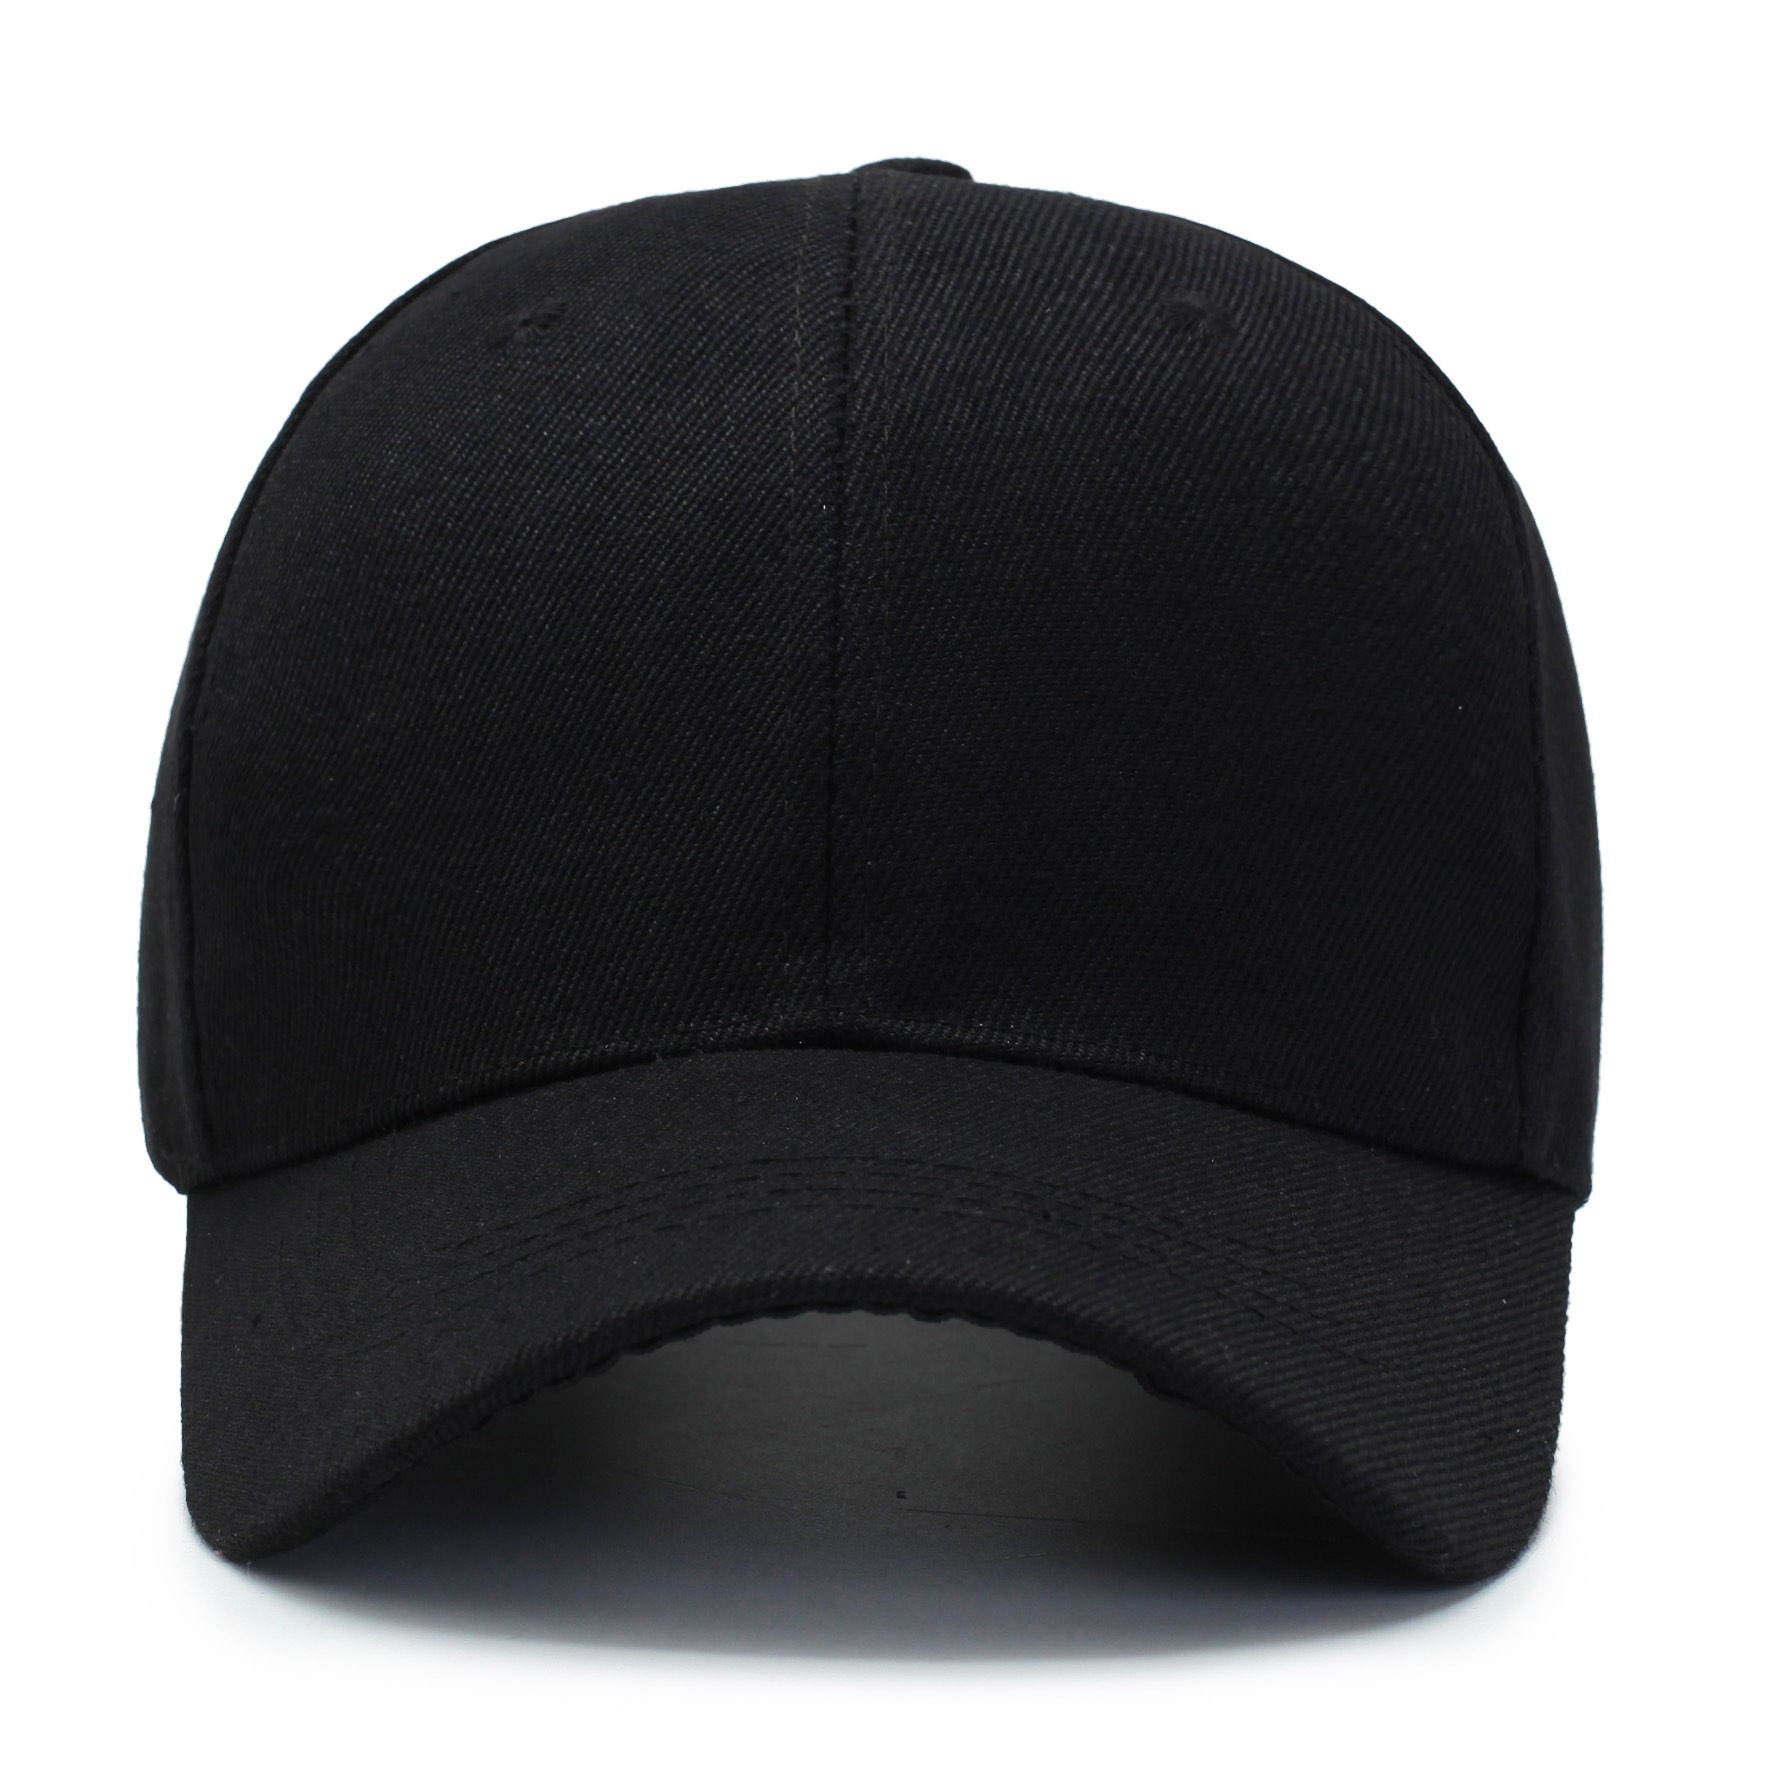 Hat Women's Solid Color Light Board Thickened Peaked Cap Outdoor Sun Hat Black White Fur Green Baseball Cap Spot Wholesale